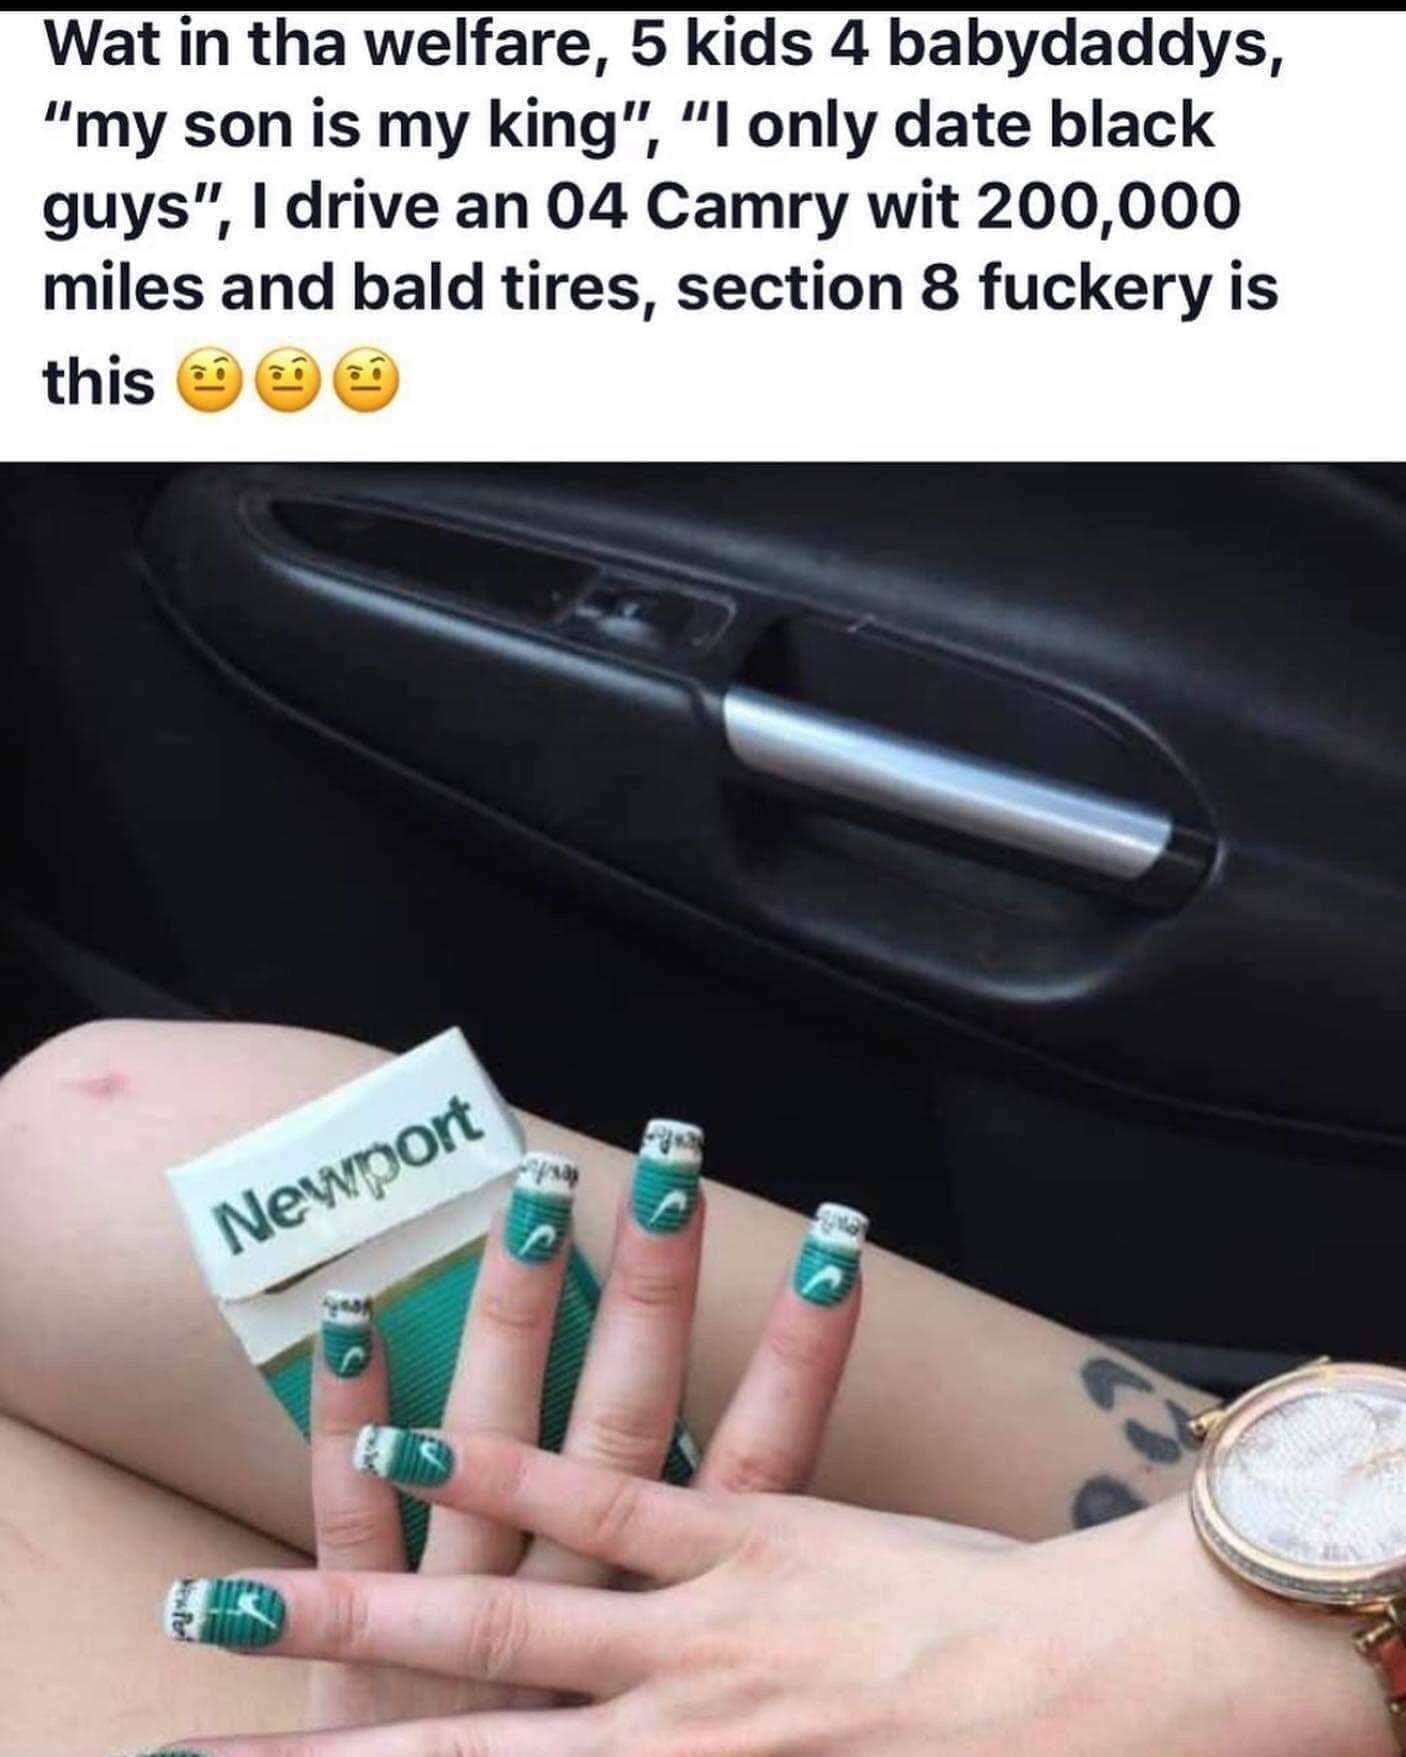 newport cig nails - Wat in tha welfare, 5 kids 4 babydaddys, "my son is my king", "I only date black guys", I drive an 04 Camry wit 200,000 miles and bald tires, section 8 fuckery is this Newport